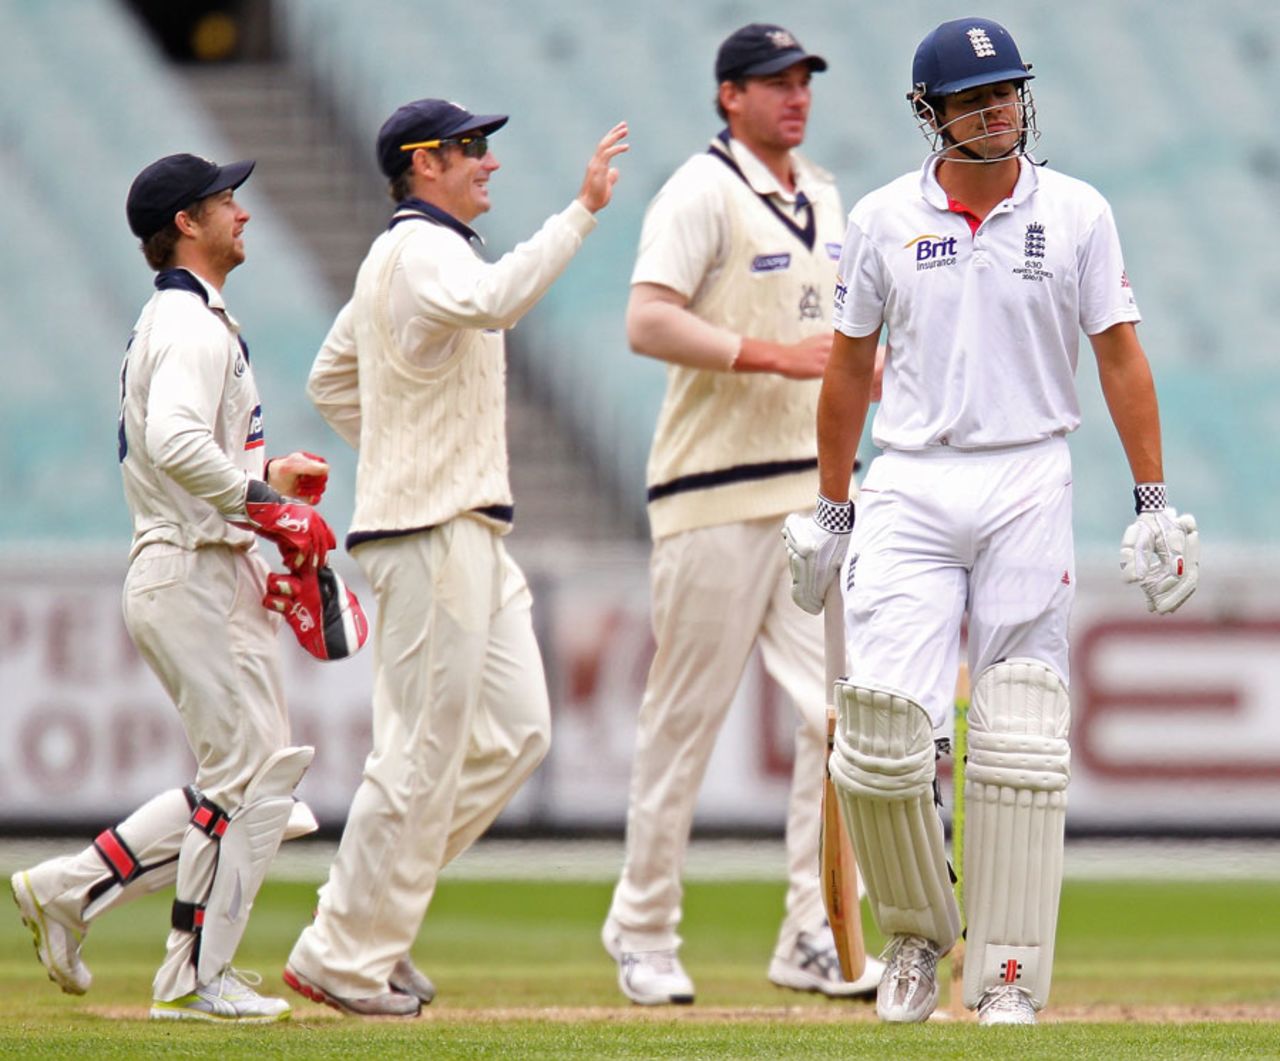 Alastair Cook walks off after being bowled for 10, Victoria v England XI, Melbourne, 3rd day, December 12, 2010